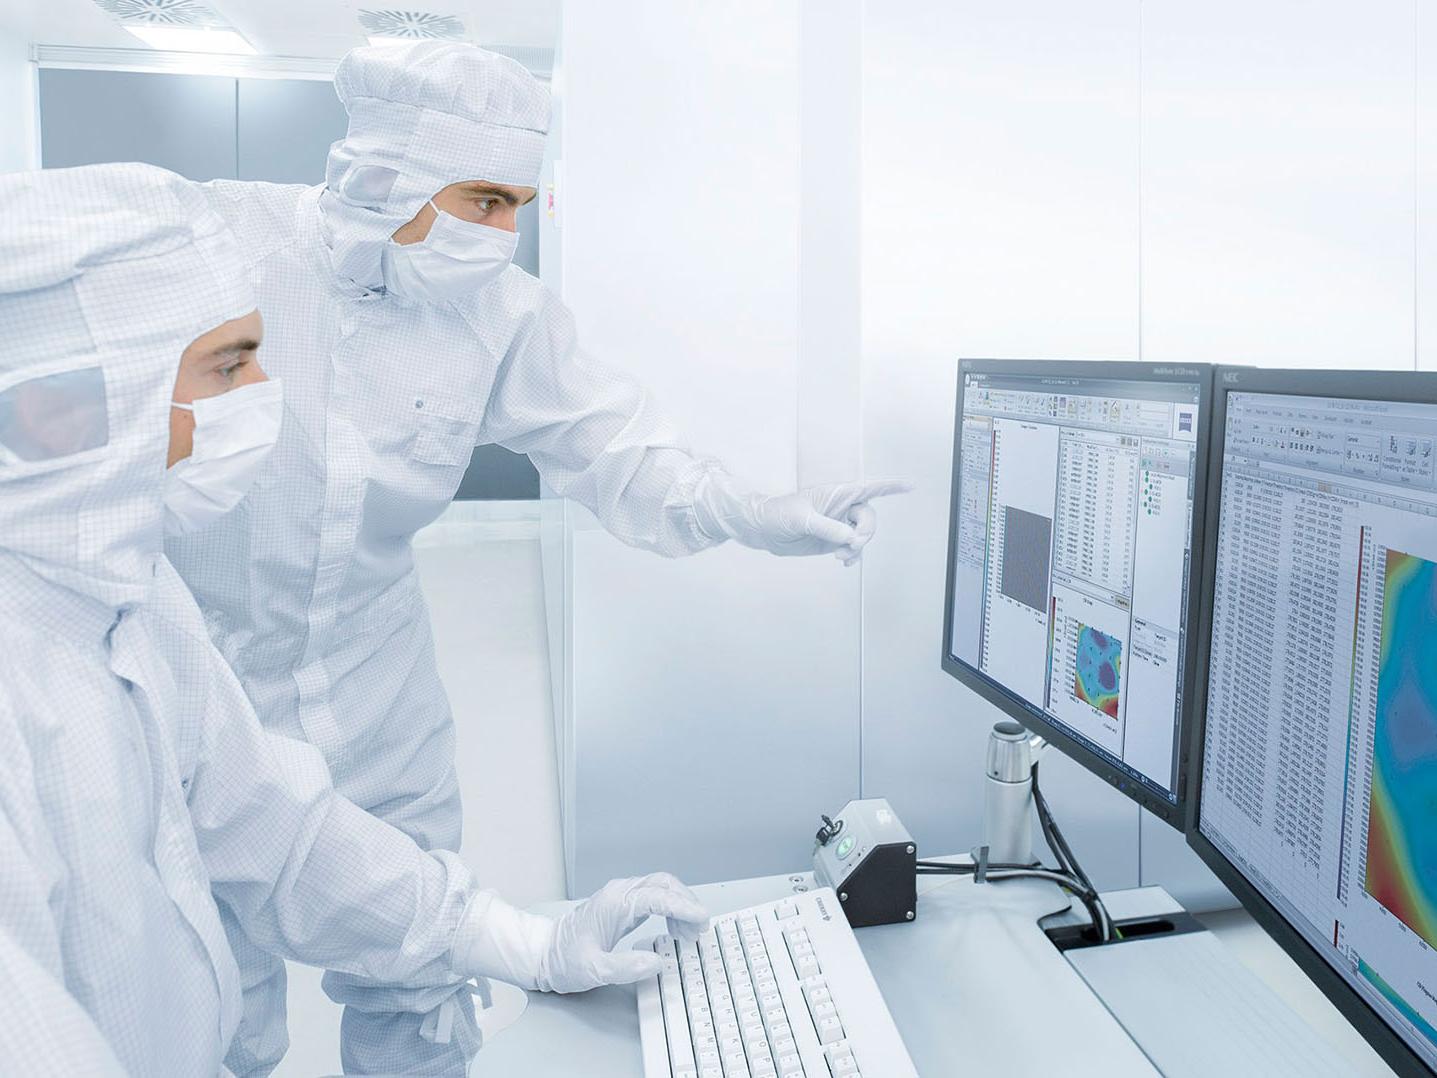 Two employees working in the clean room of ZEISS SMT